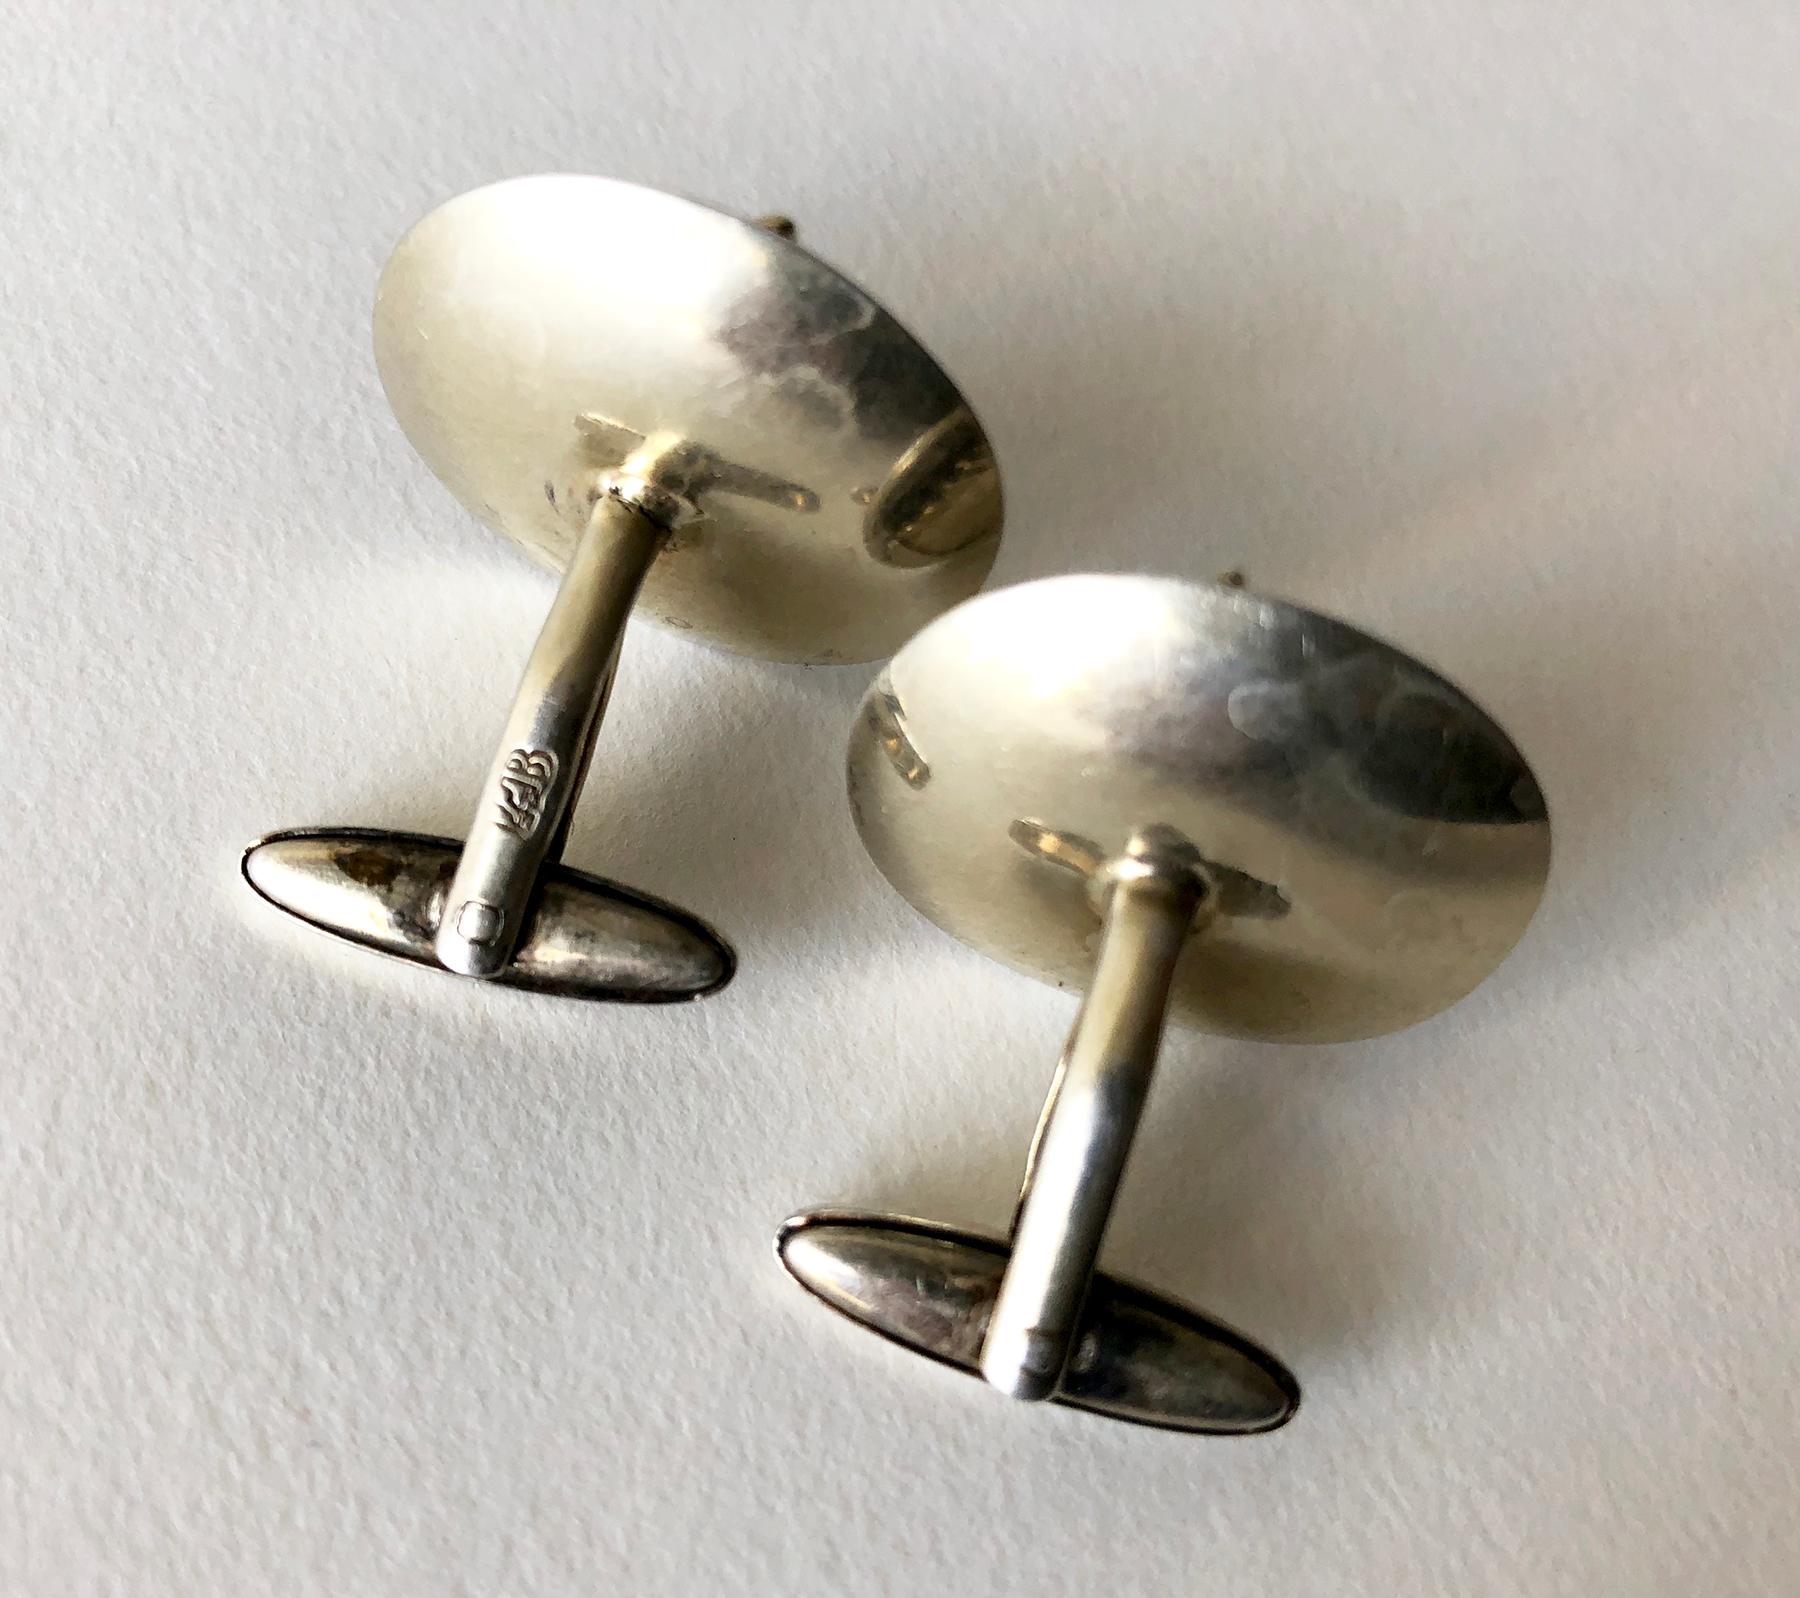 European cufflinks featuring horse head relief with light gold wash and good detail, circa 1960's.  Cufflinks measure 1